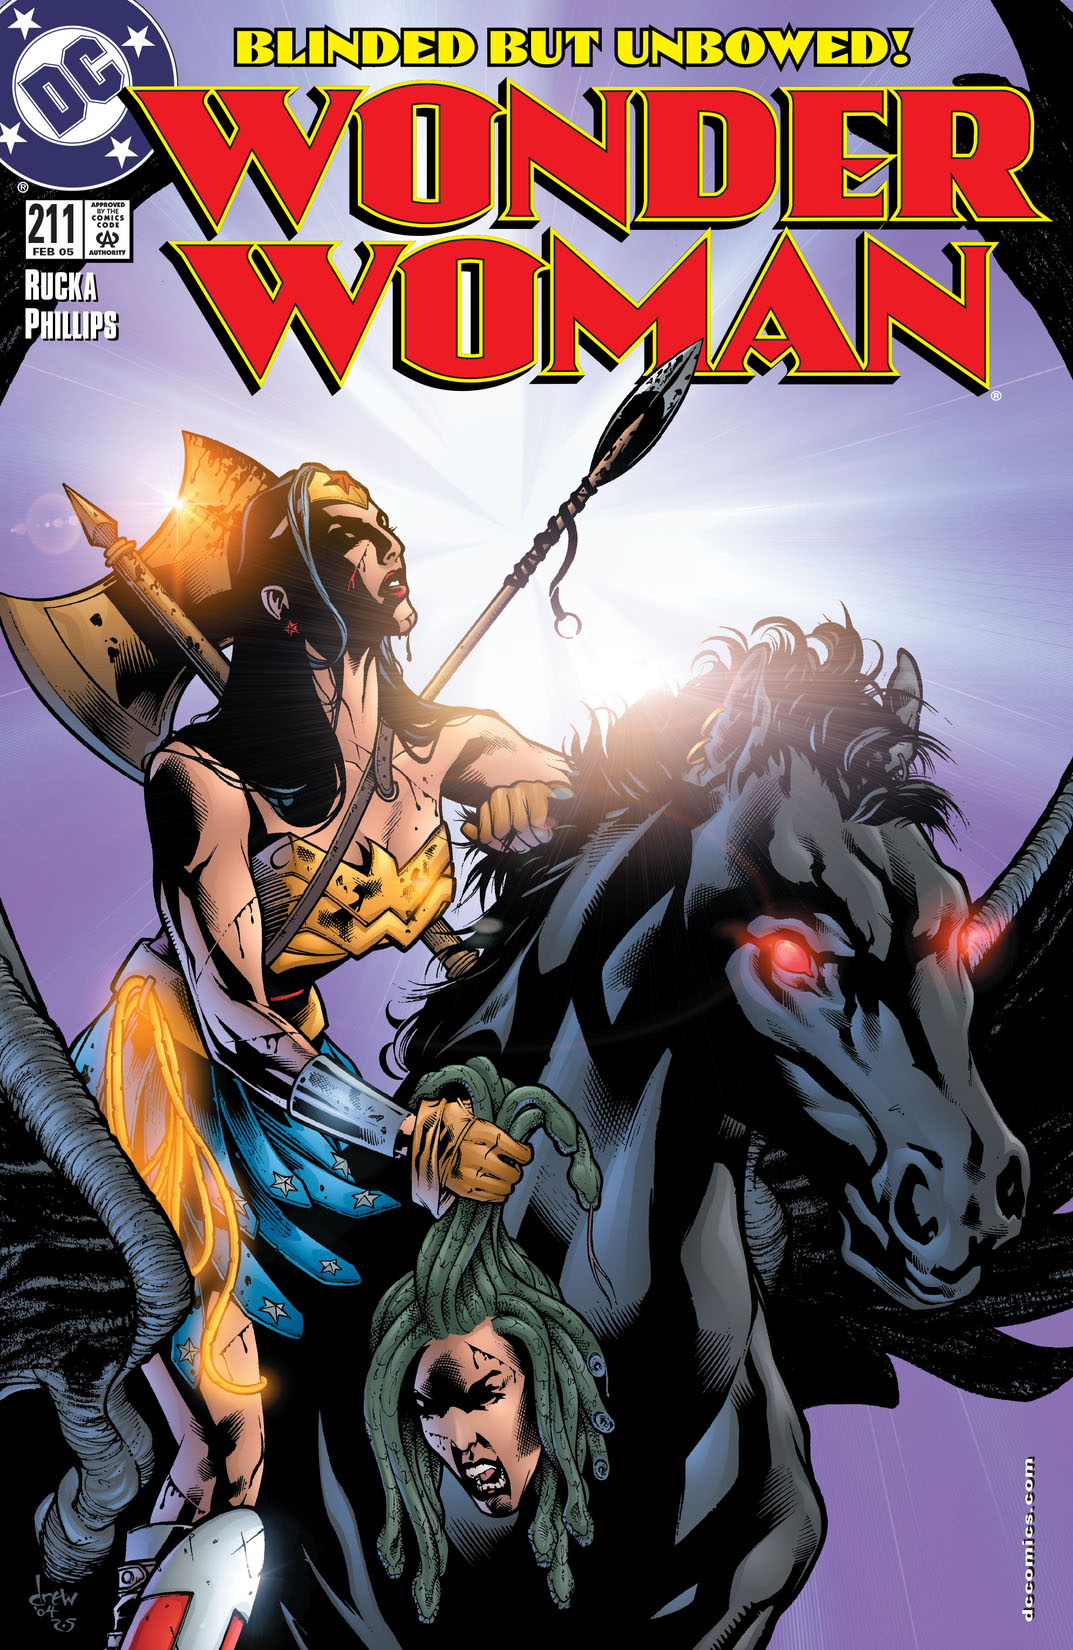 Wonder Woman (1986-) #211 preview images